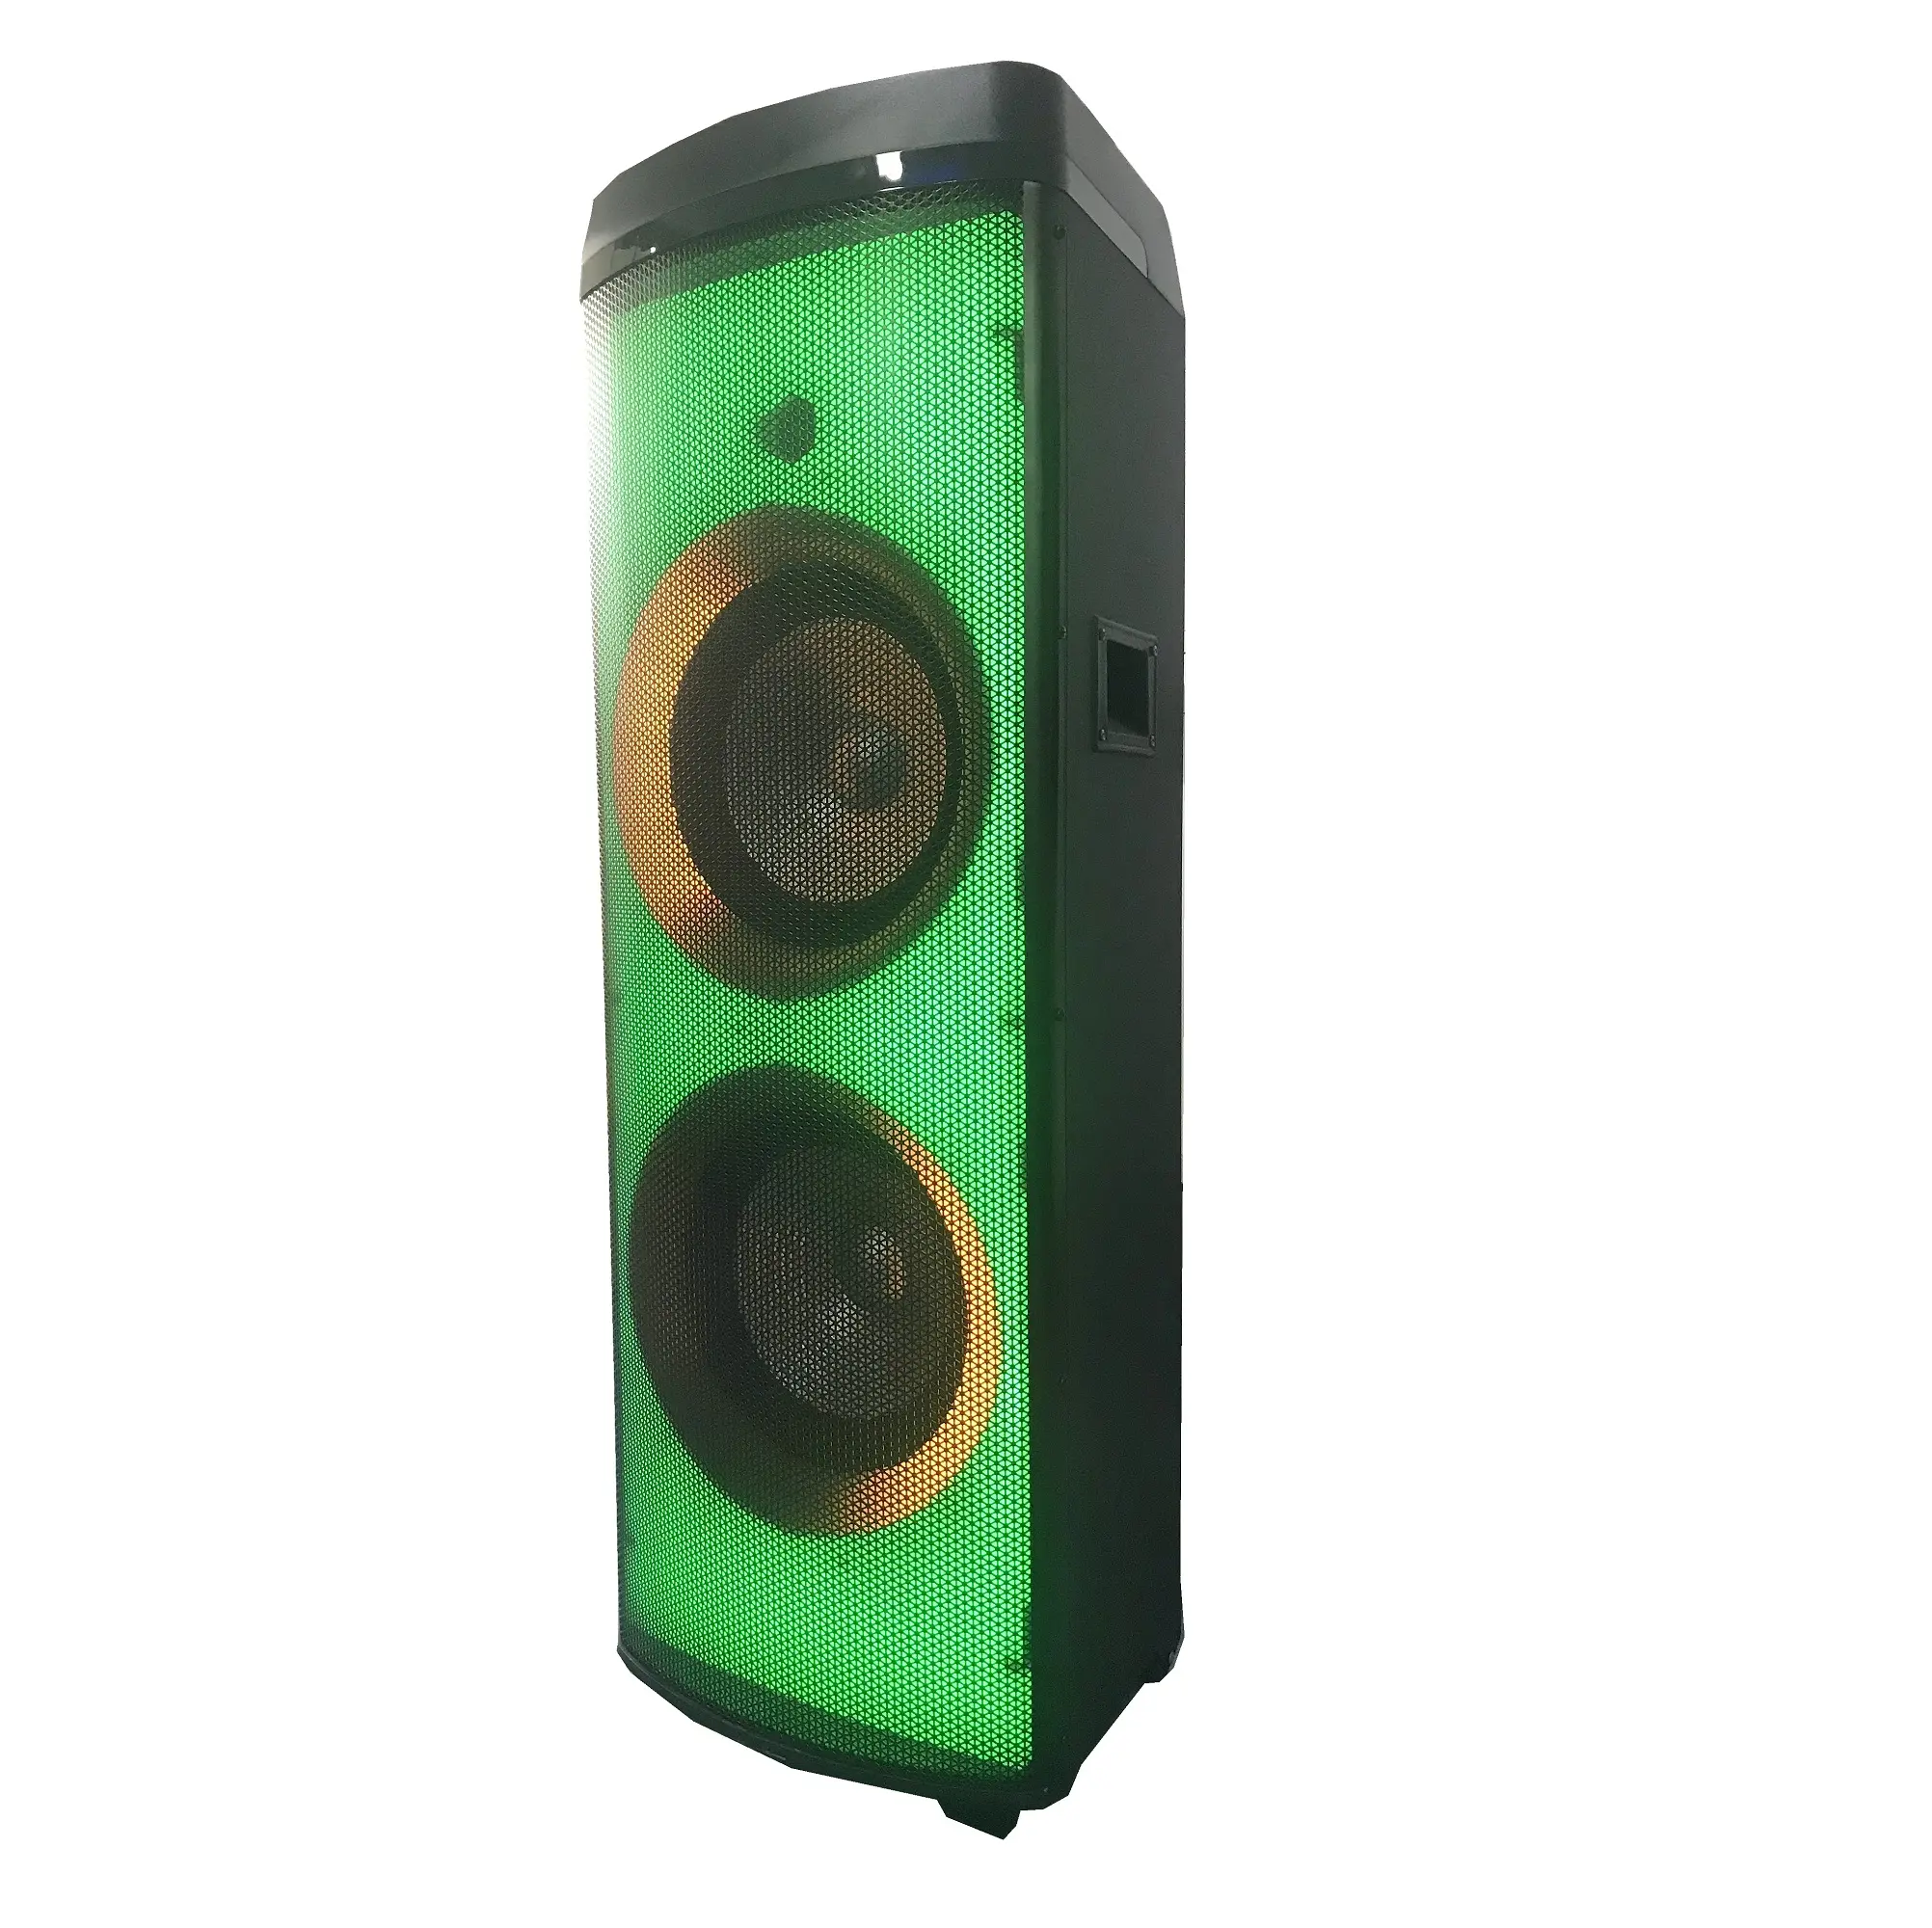 OEM speaker factory double 10 inch flame speaker with tws,aux,audio,fm,usb,wireless connection